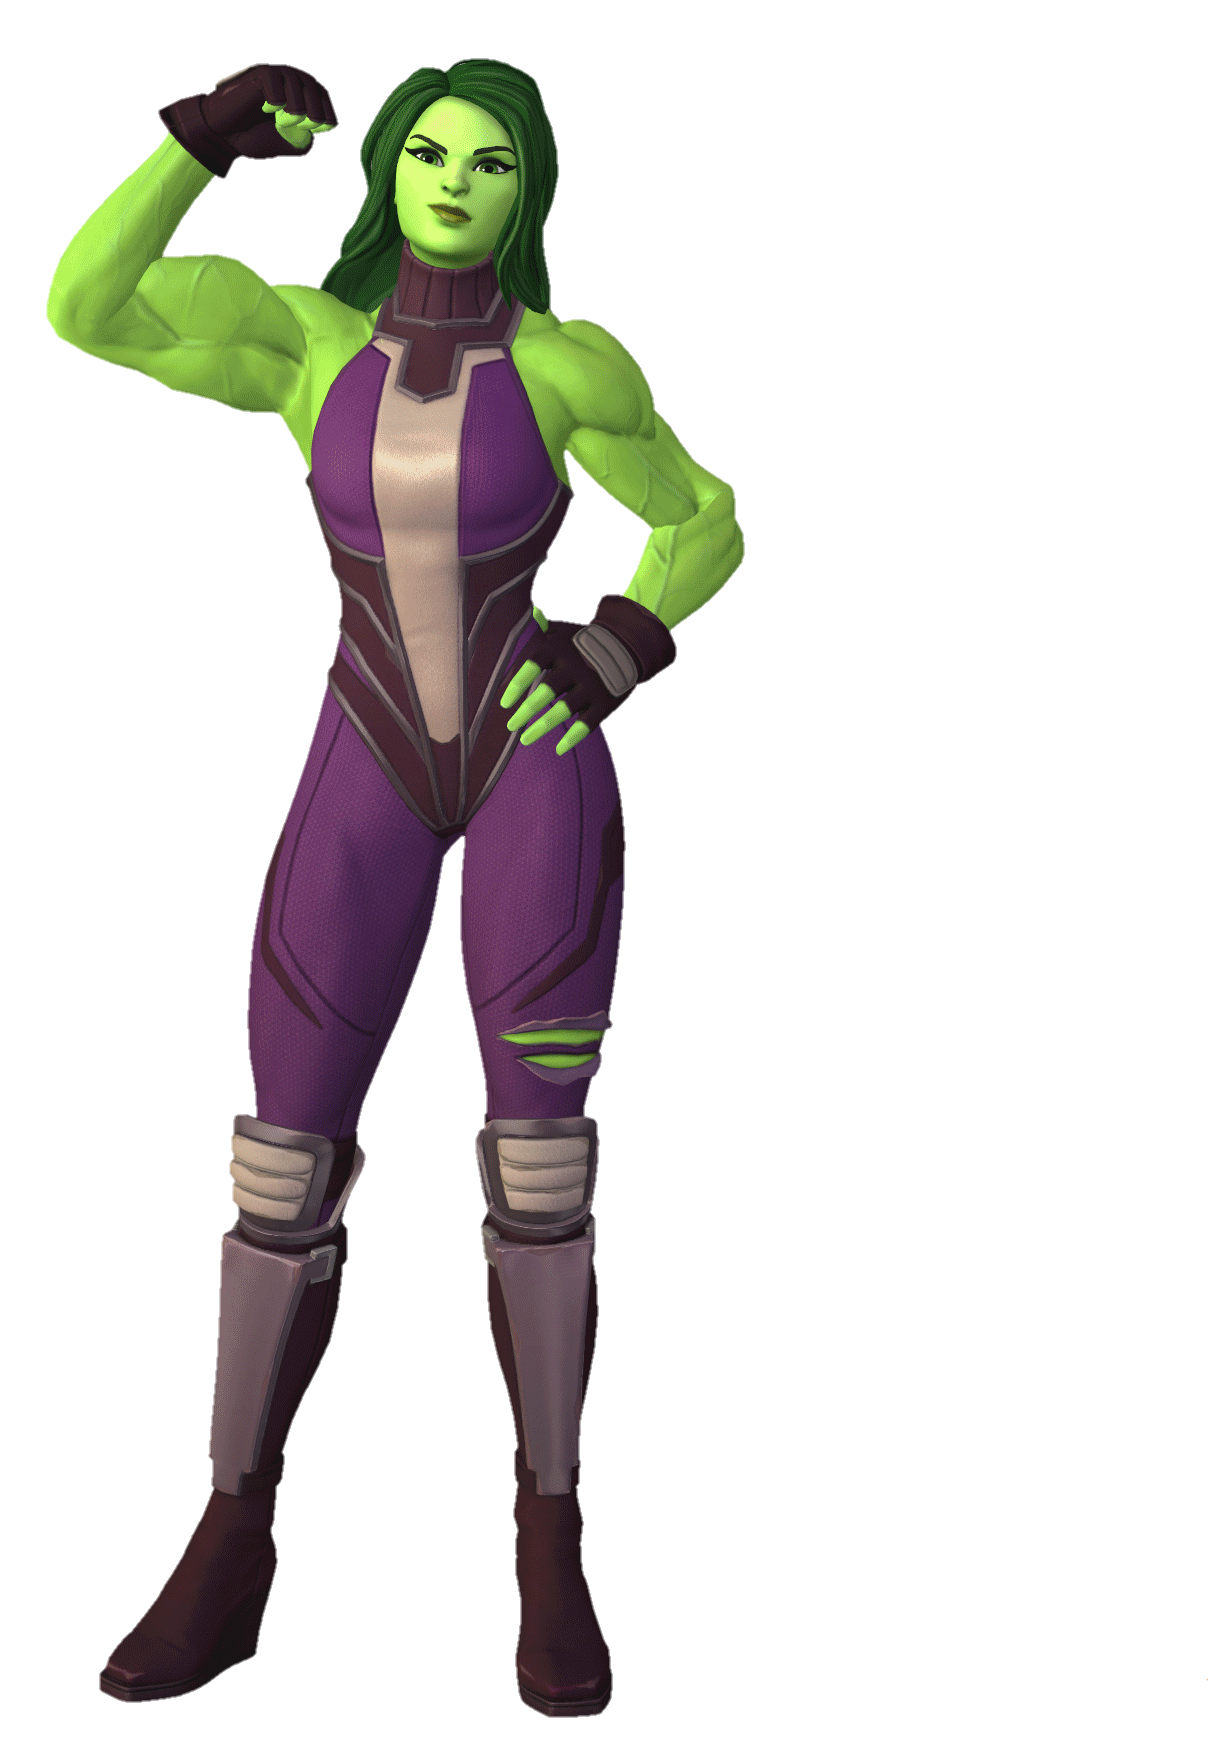 she-hulk-png-image-from-pngfre-15